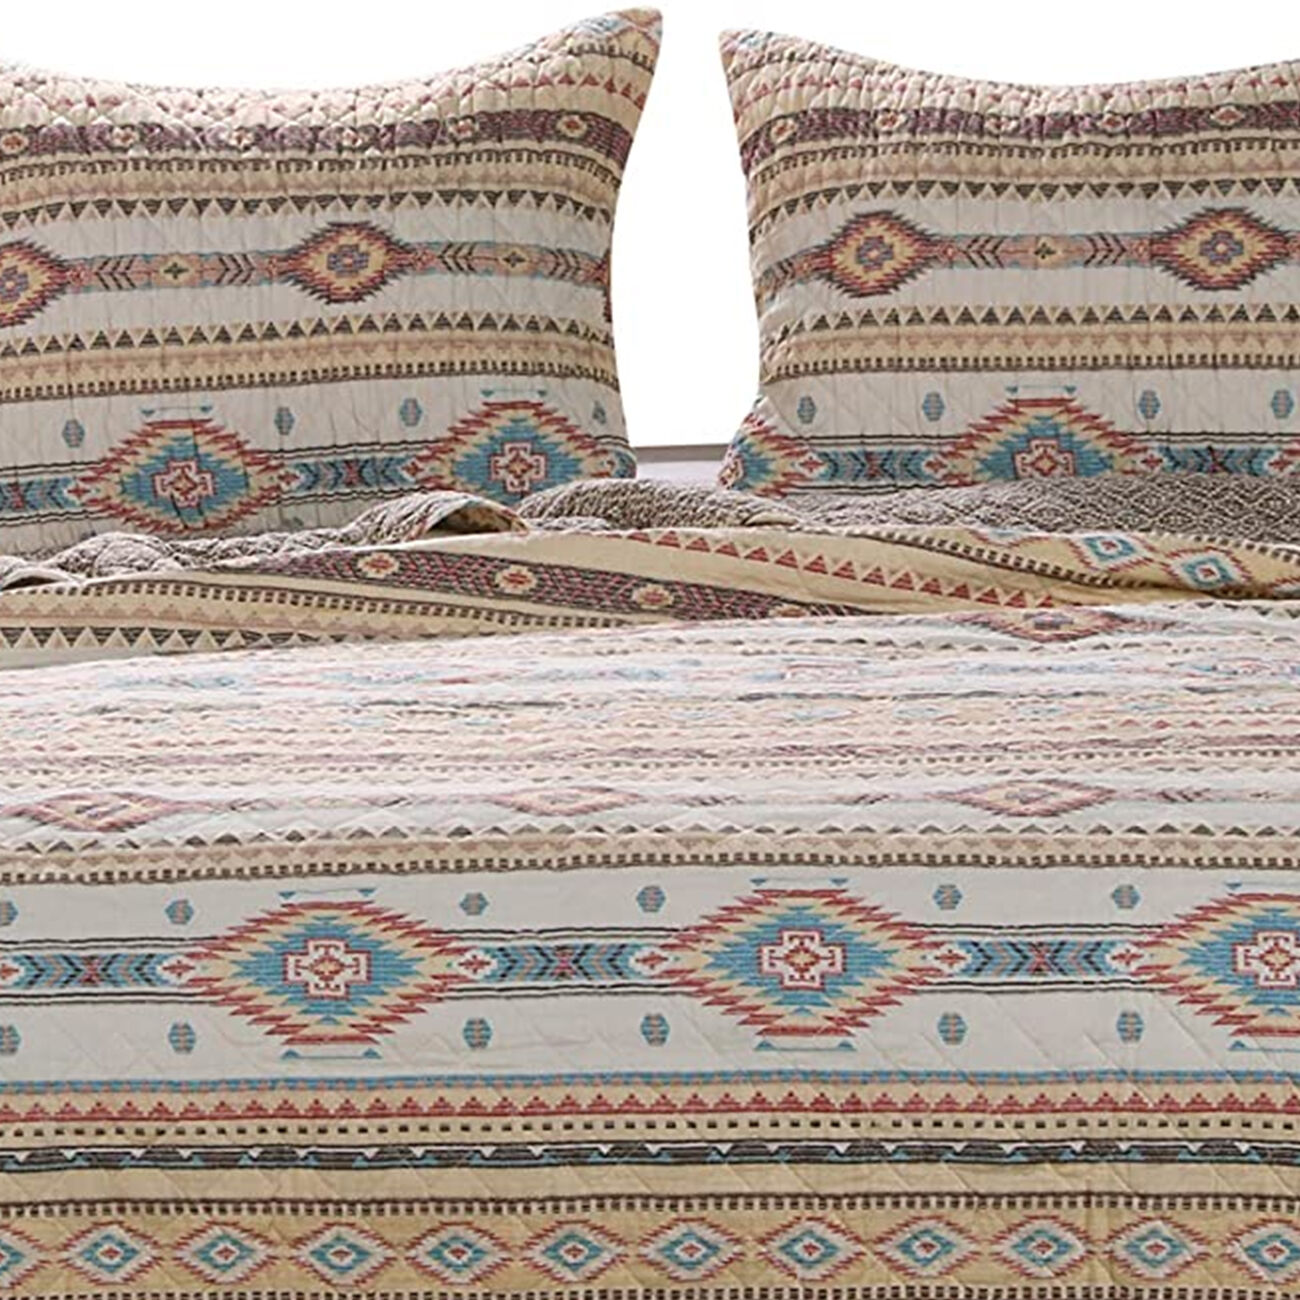 King Size 3 Piece Polyester Quilt Set with Kilim Pattern, Multicolor